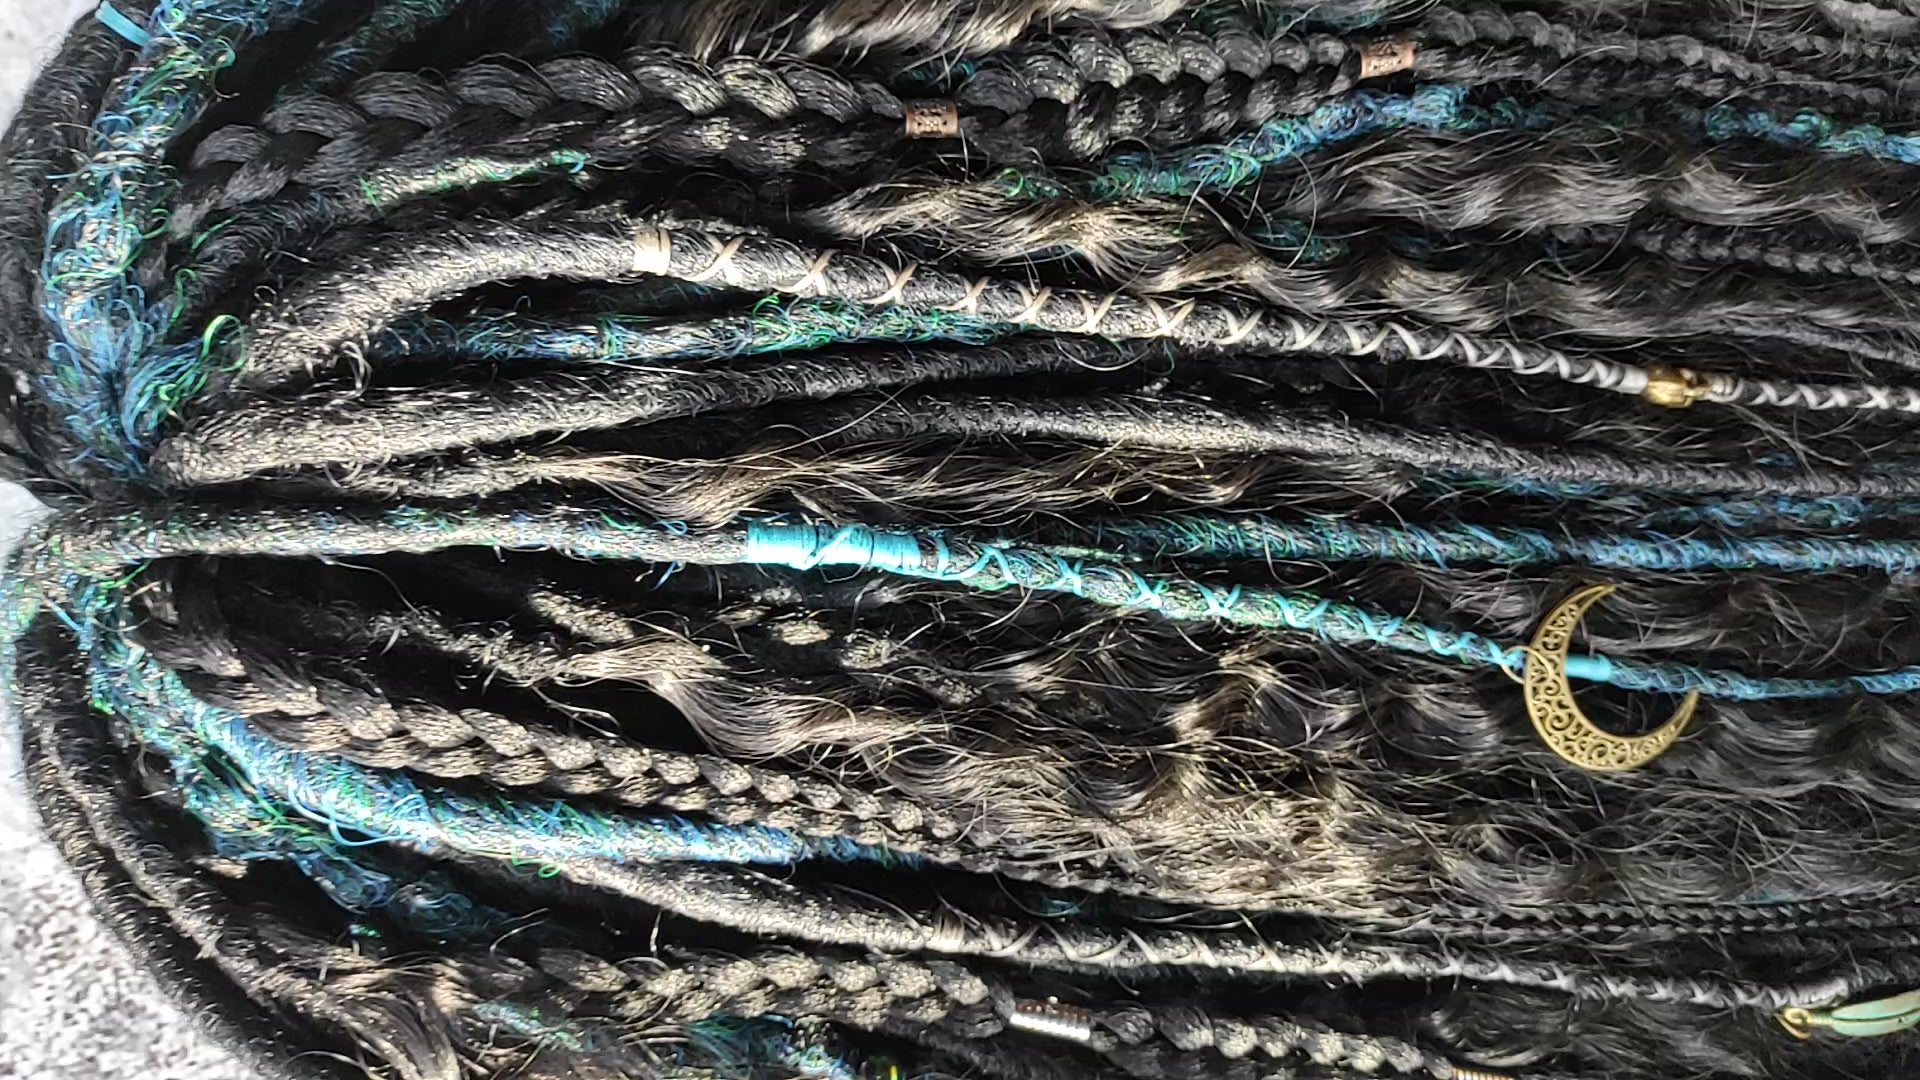 Black and Dark Green Synthetic Dreads with Curls